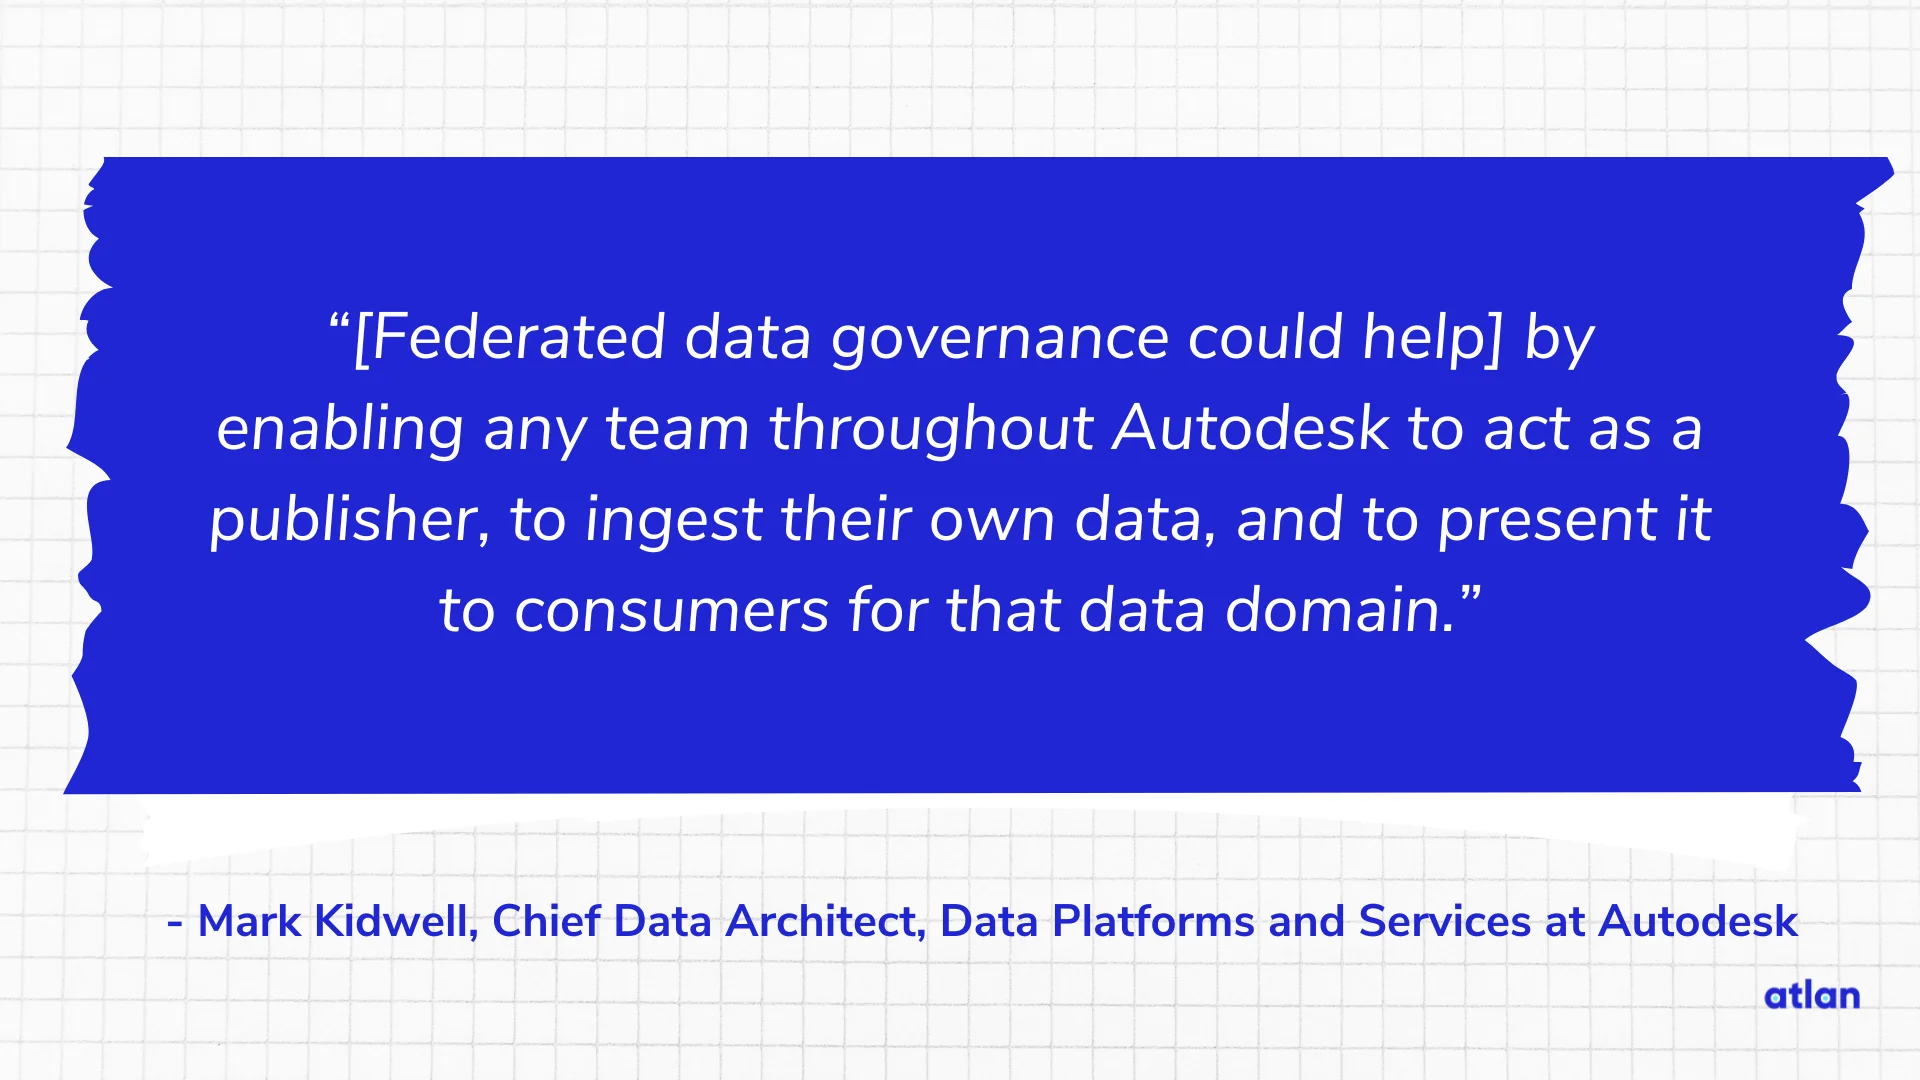 Benefits of federated data governance